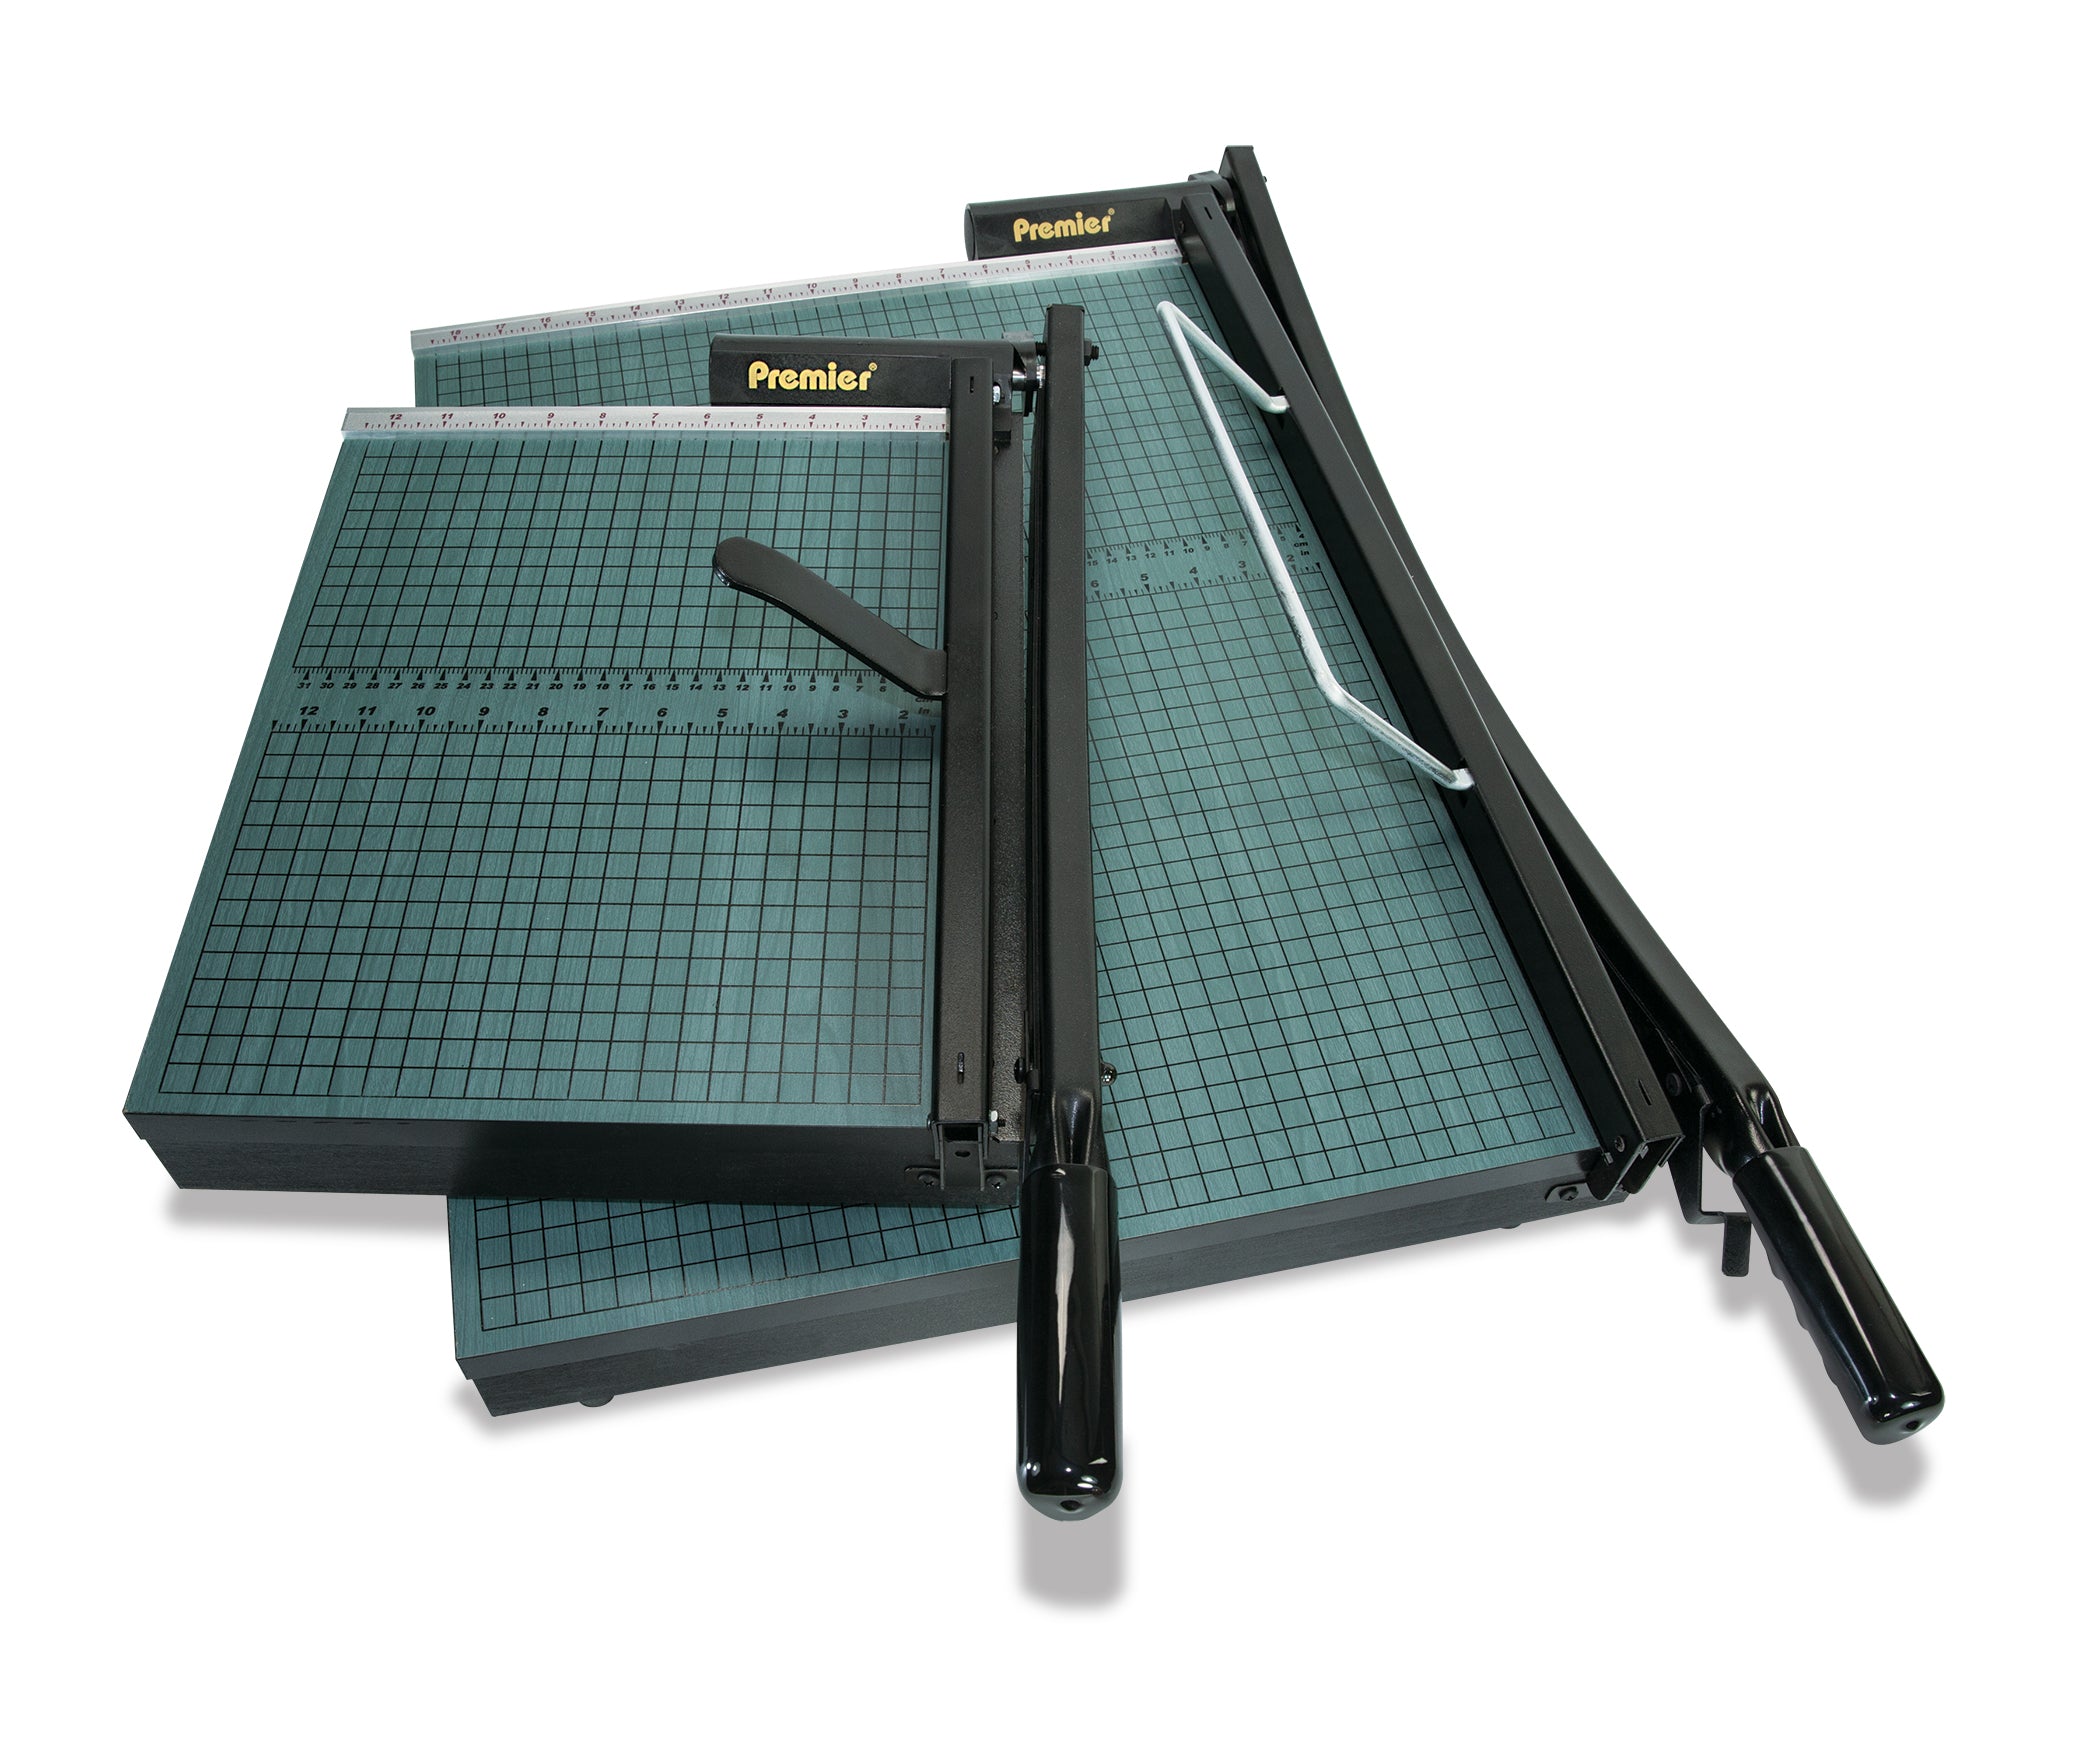 A4 Paper Cutter, Stack Paper Trimmer Guillotine 13” Cutting Length,  Commercial Grade Guillotine Paper Slicer Cutter, 12 Sheet Capacity, for  Office